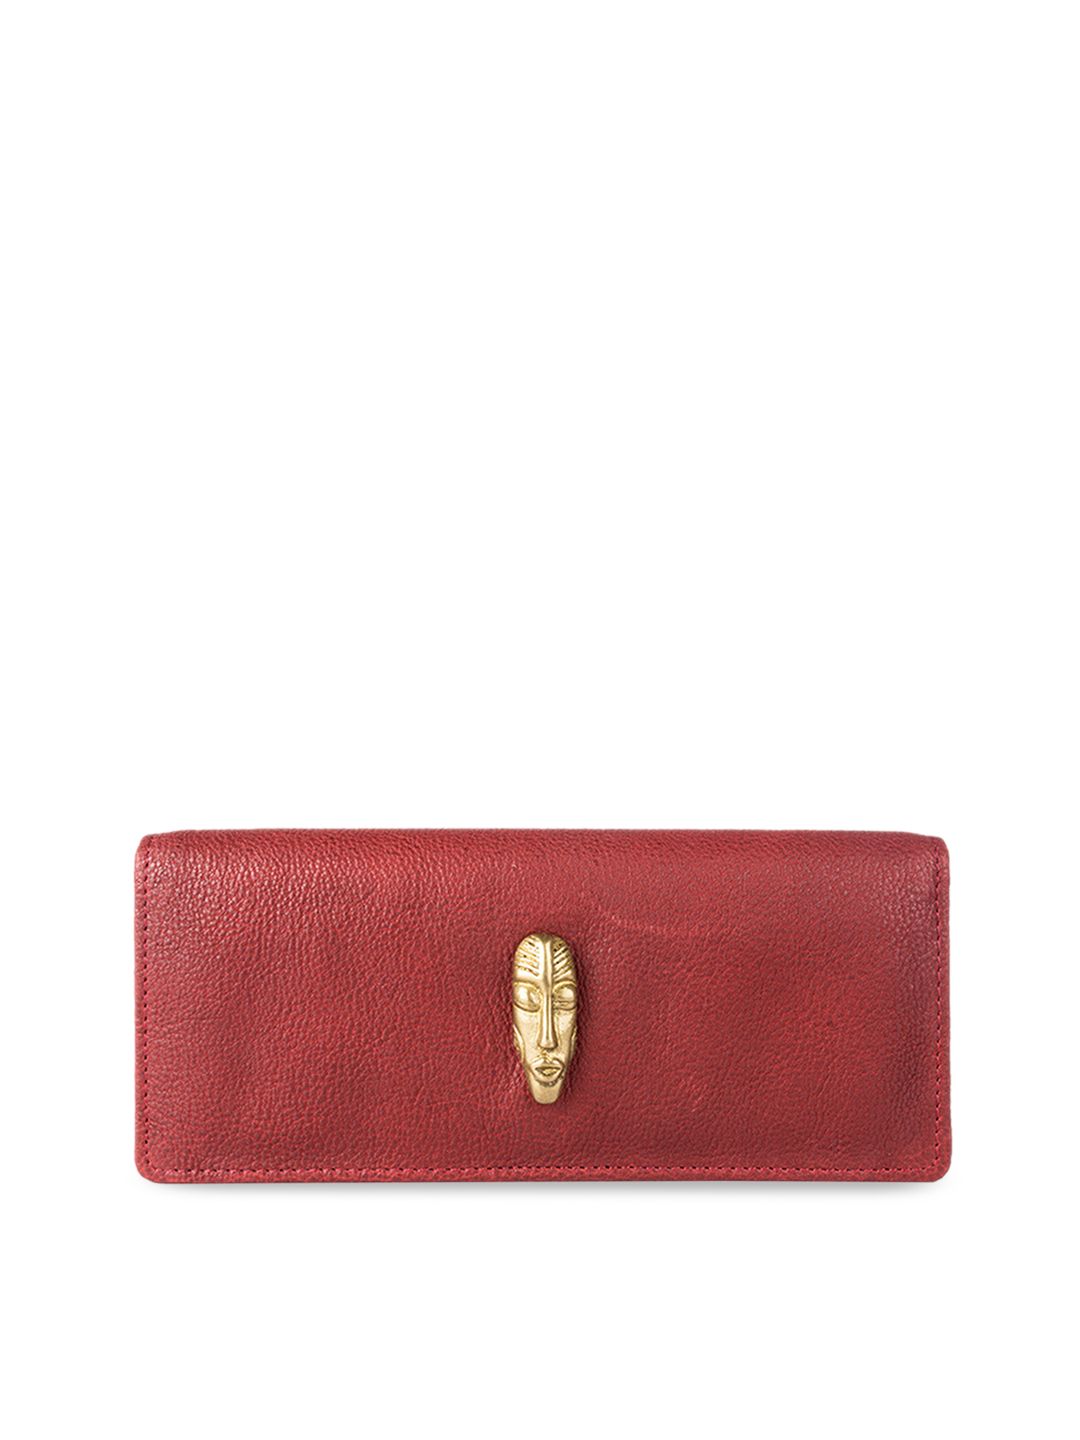 Hidesign Women Red Solid Two Fold Wallet Price in India